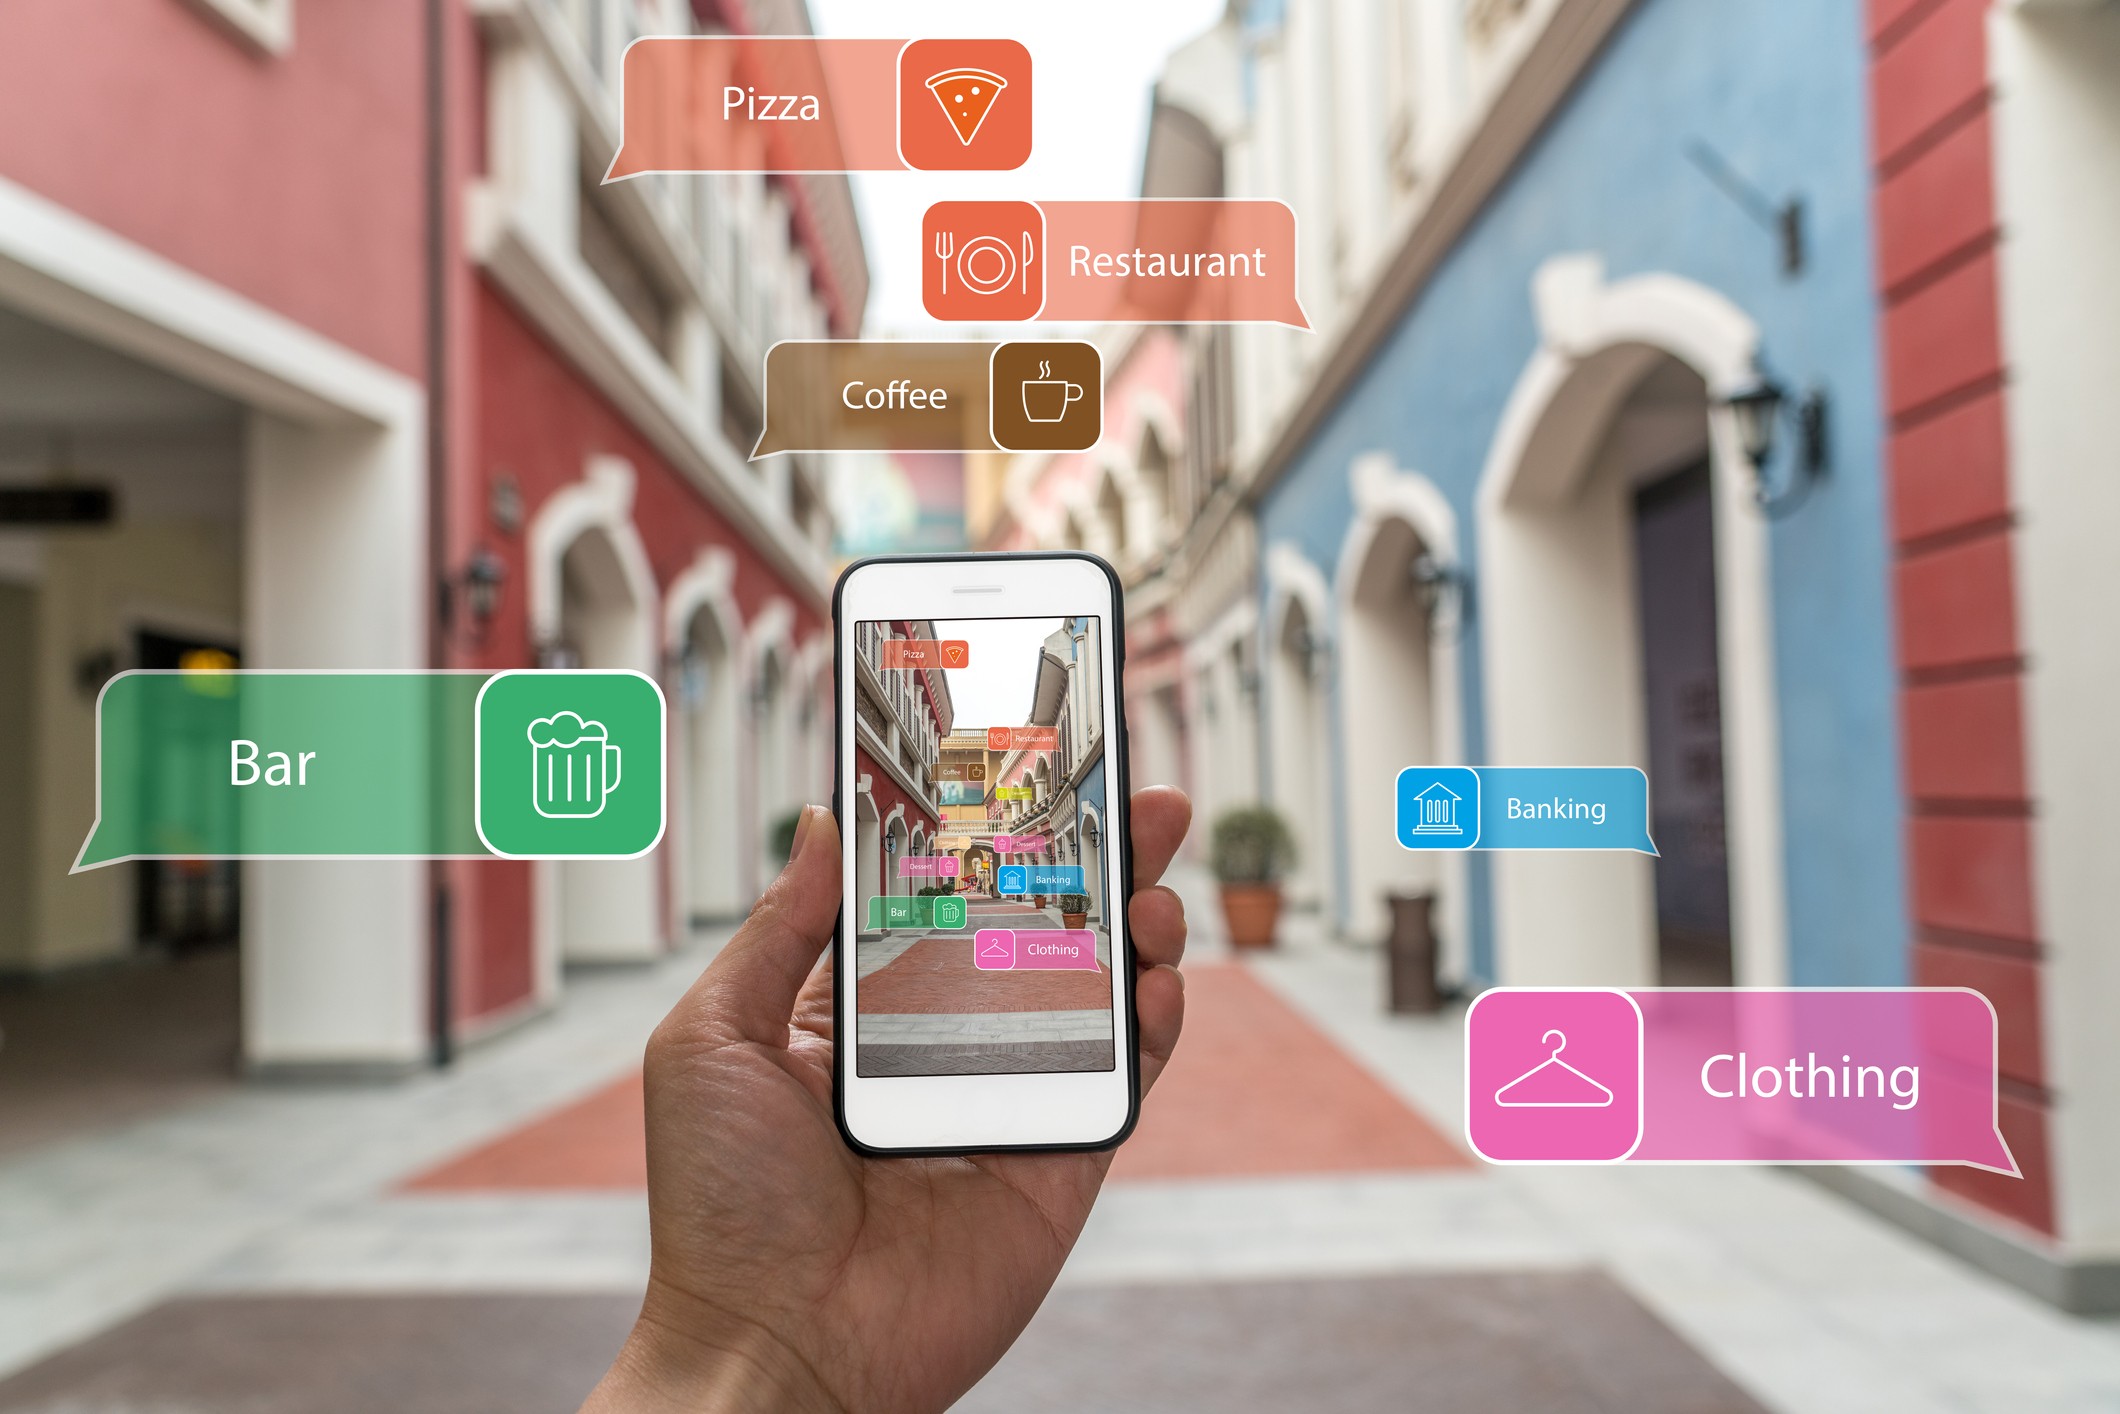 Augmented reality provides useful marketing information via the smartphone to shoppers and visitors.